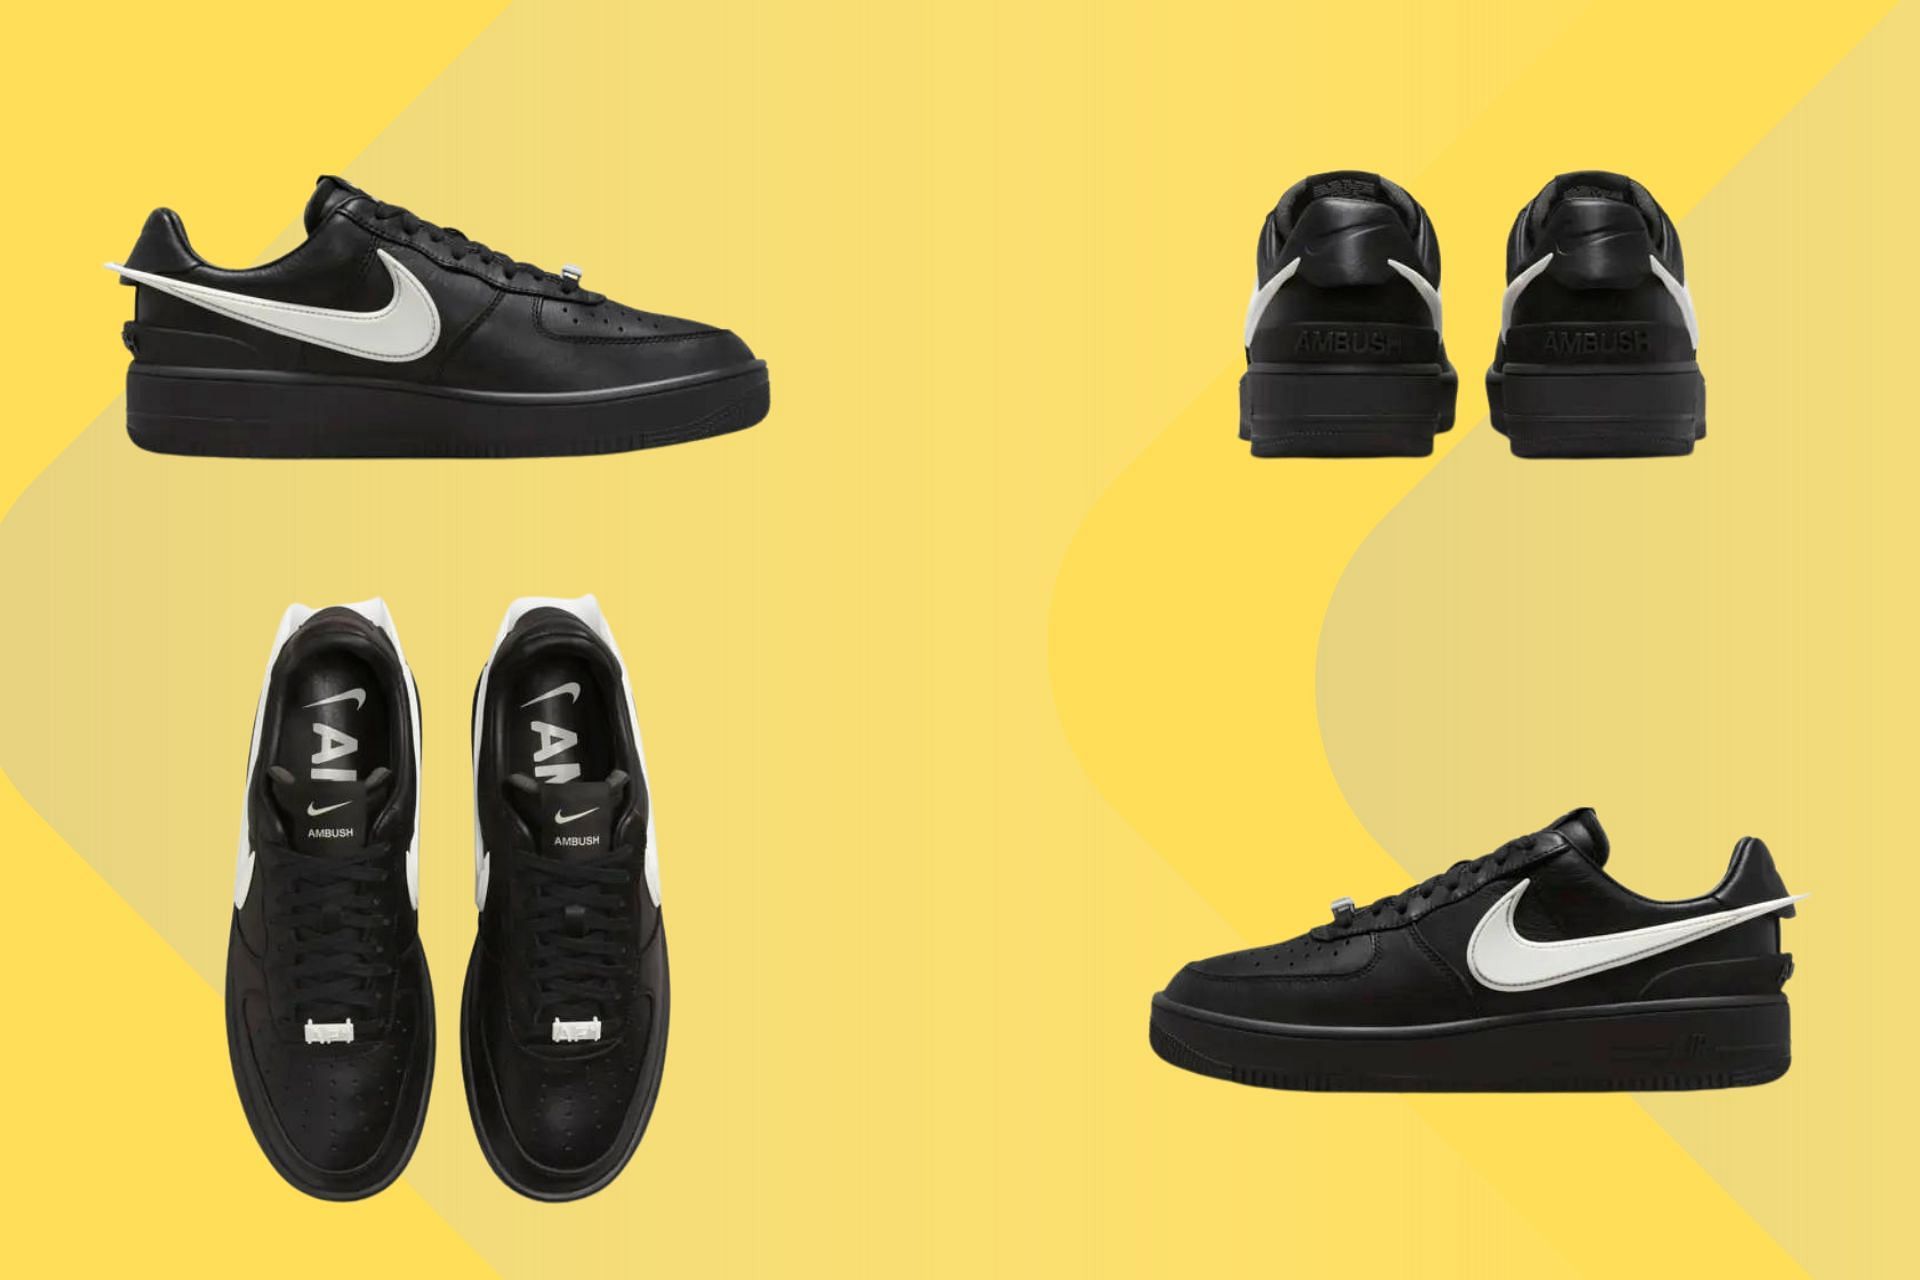 casual Nike sneakers for daily wear